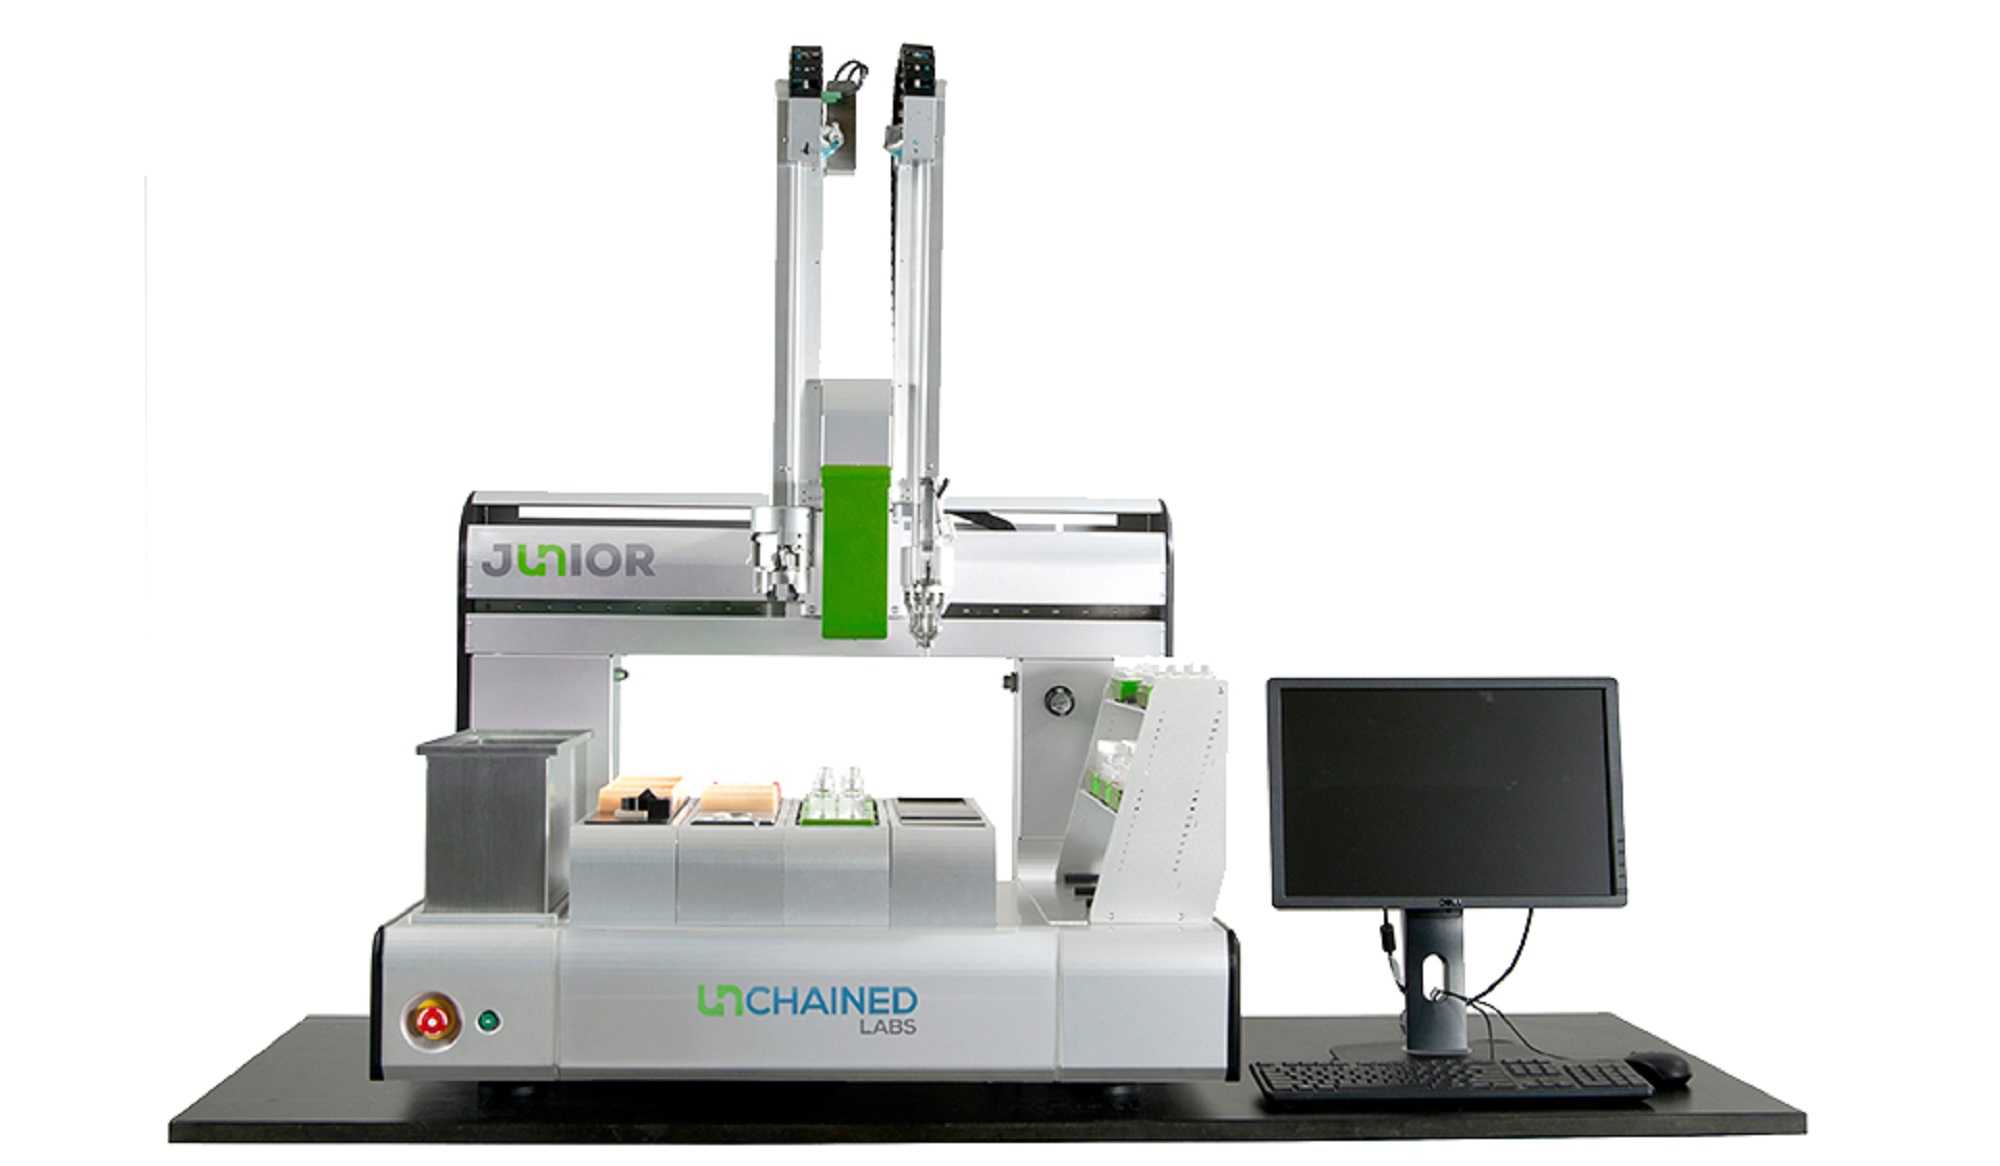 Enlarged view: Unchained Labs Junior Unit, a robotic tool used for solid sample dispensing.